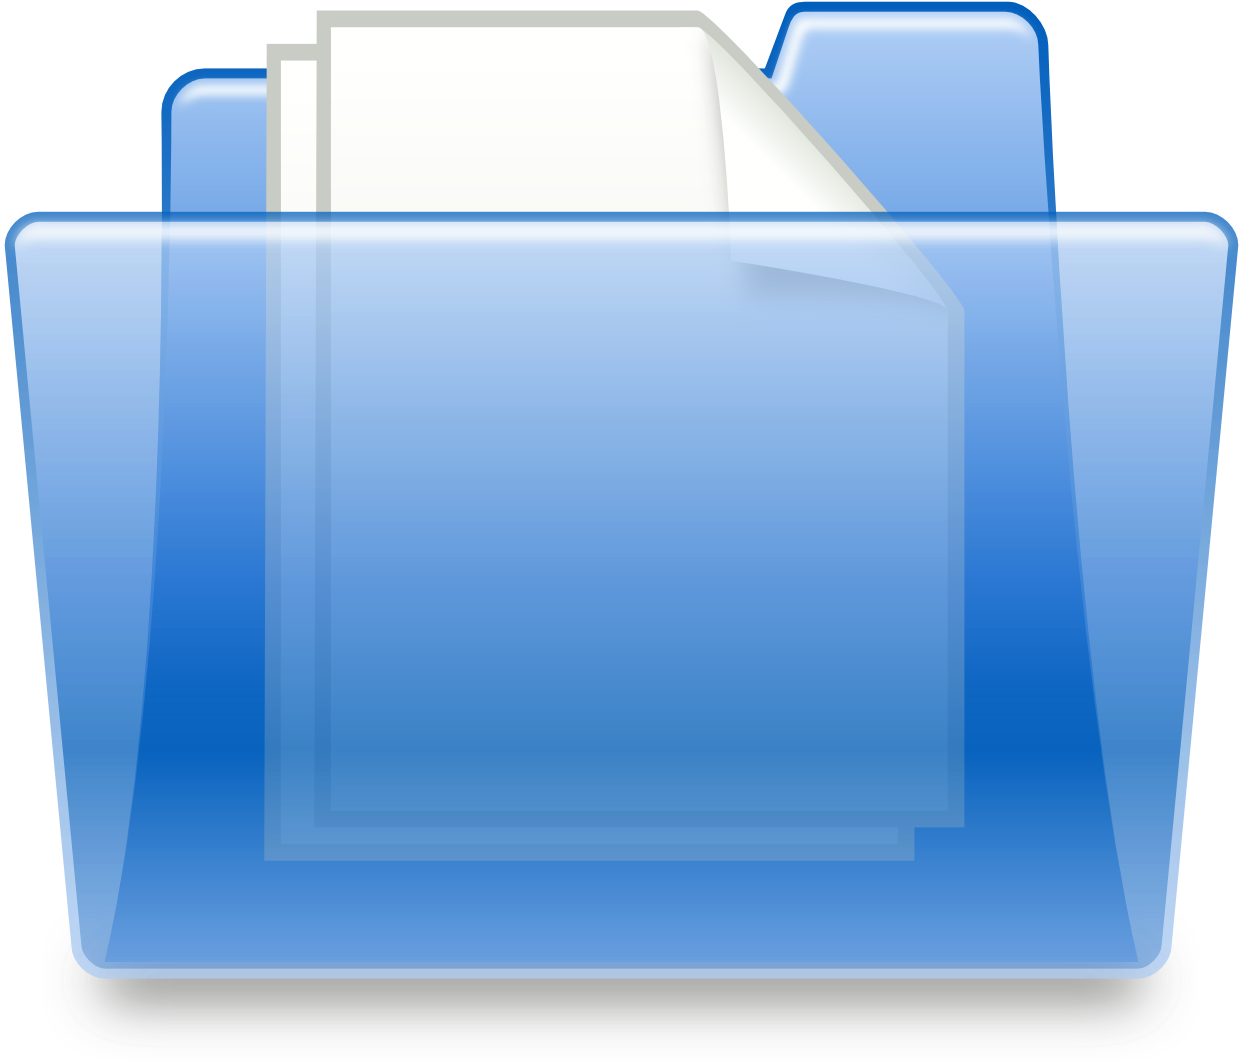 File - Igloo Icon - Svg - Wikimedia Commons - Transparent Background Folder Png (1303x1303)